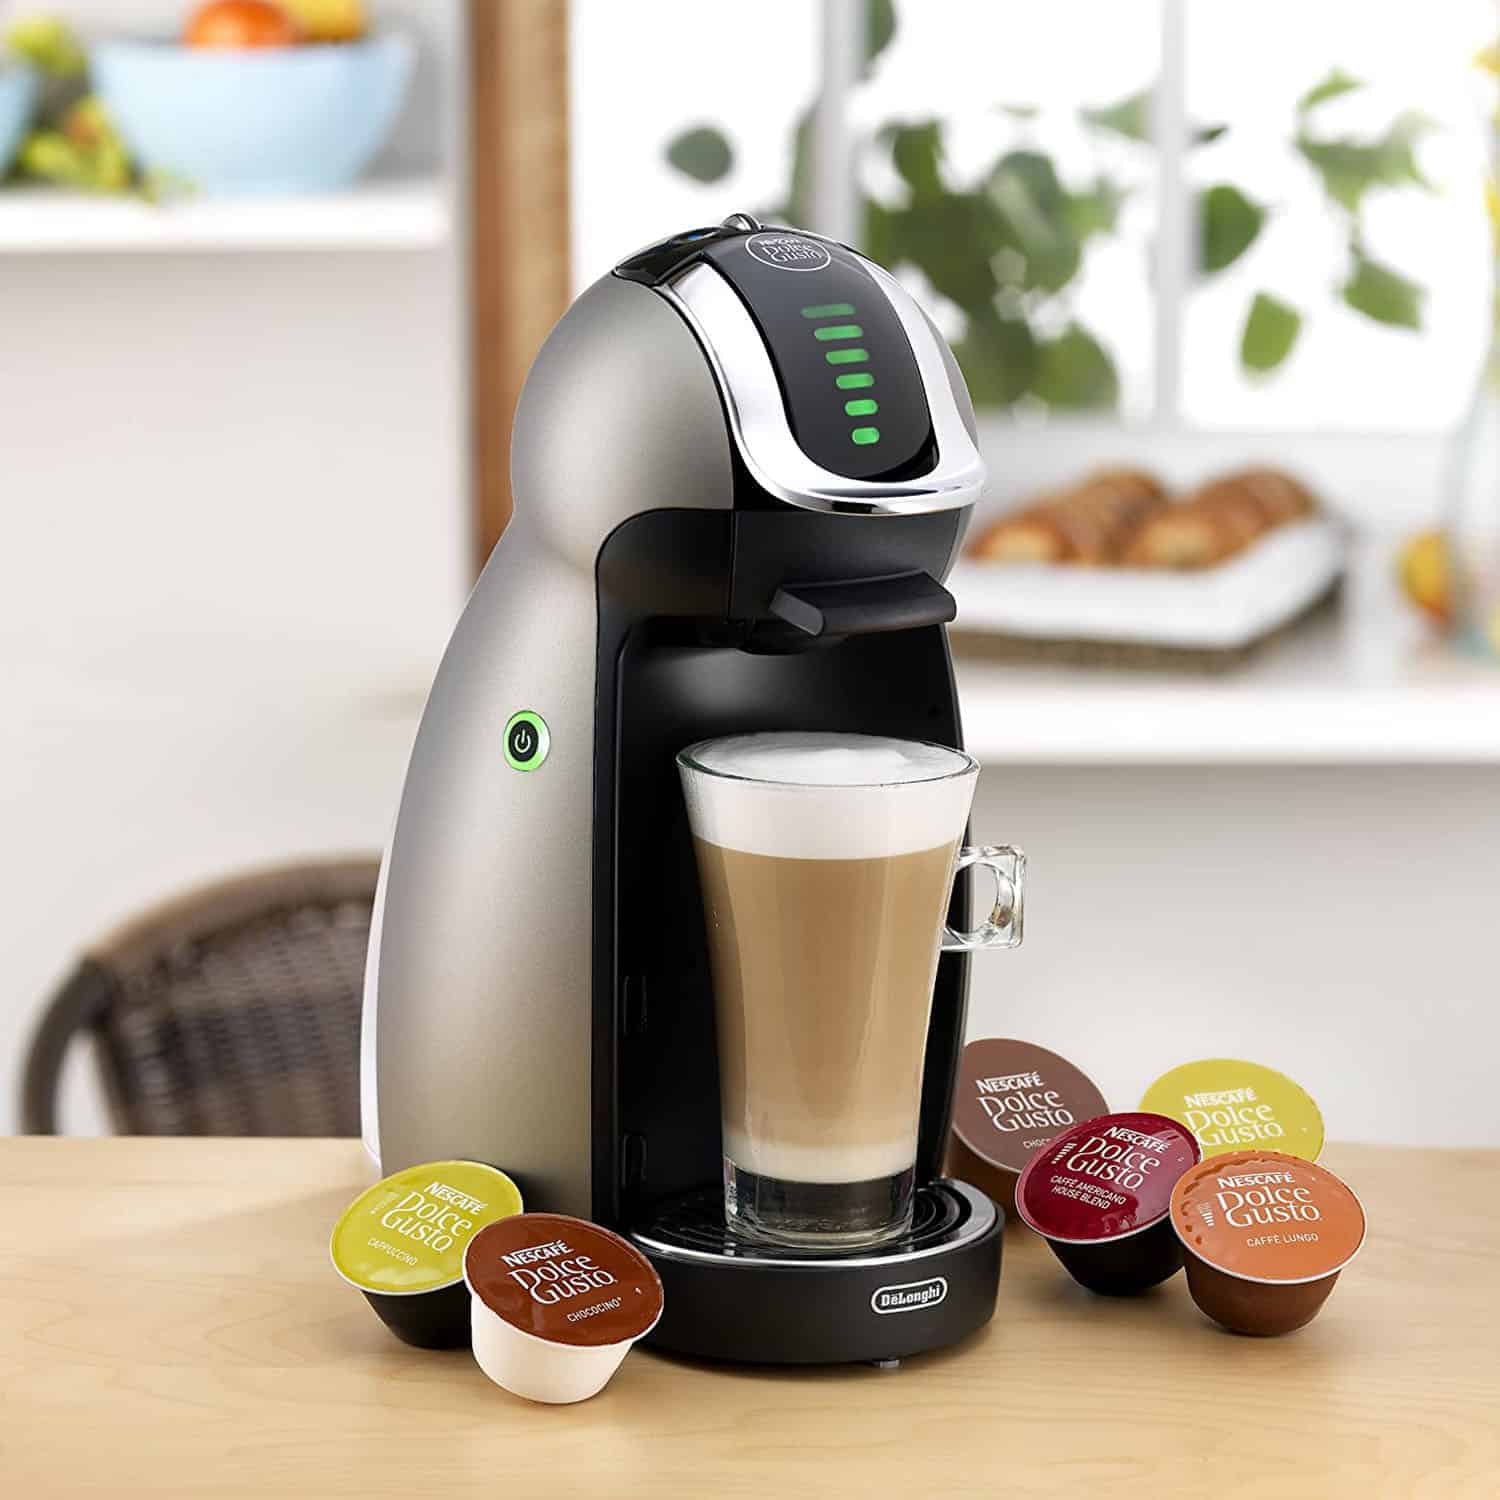 NESCAFÉ DOLCE GUSTO YOUR COFFEESHOP AT HOME 